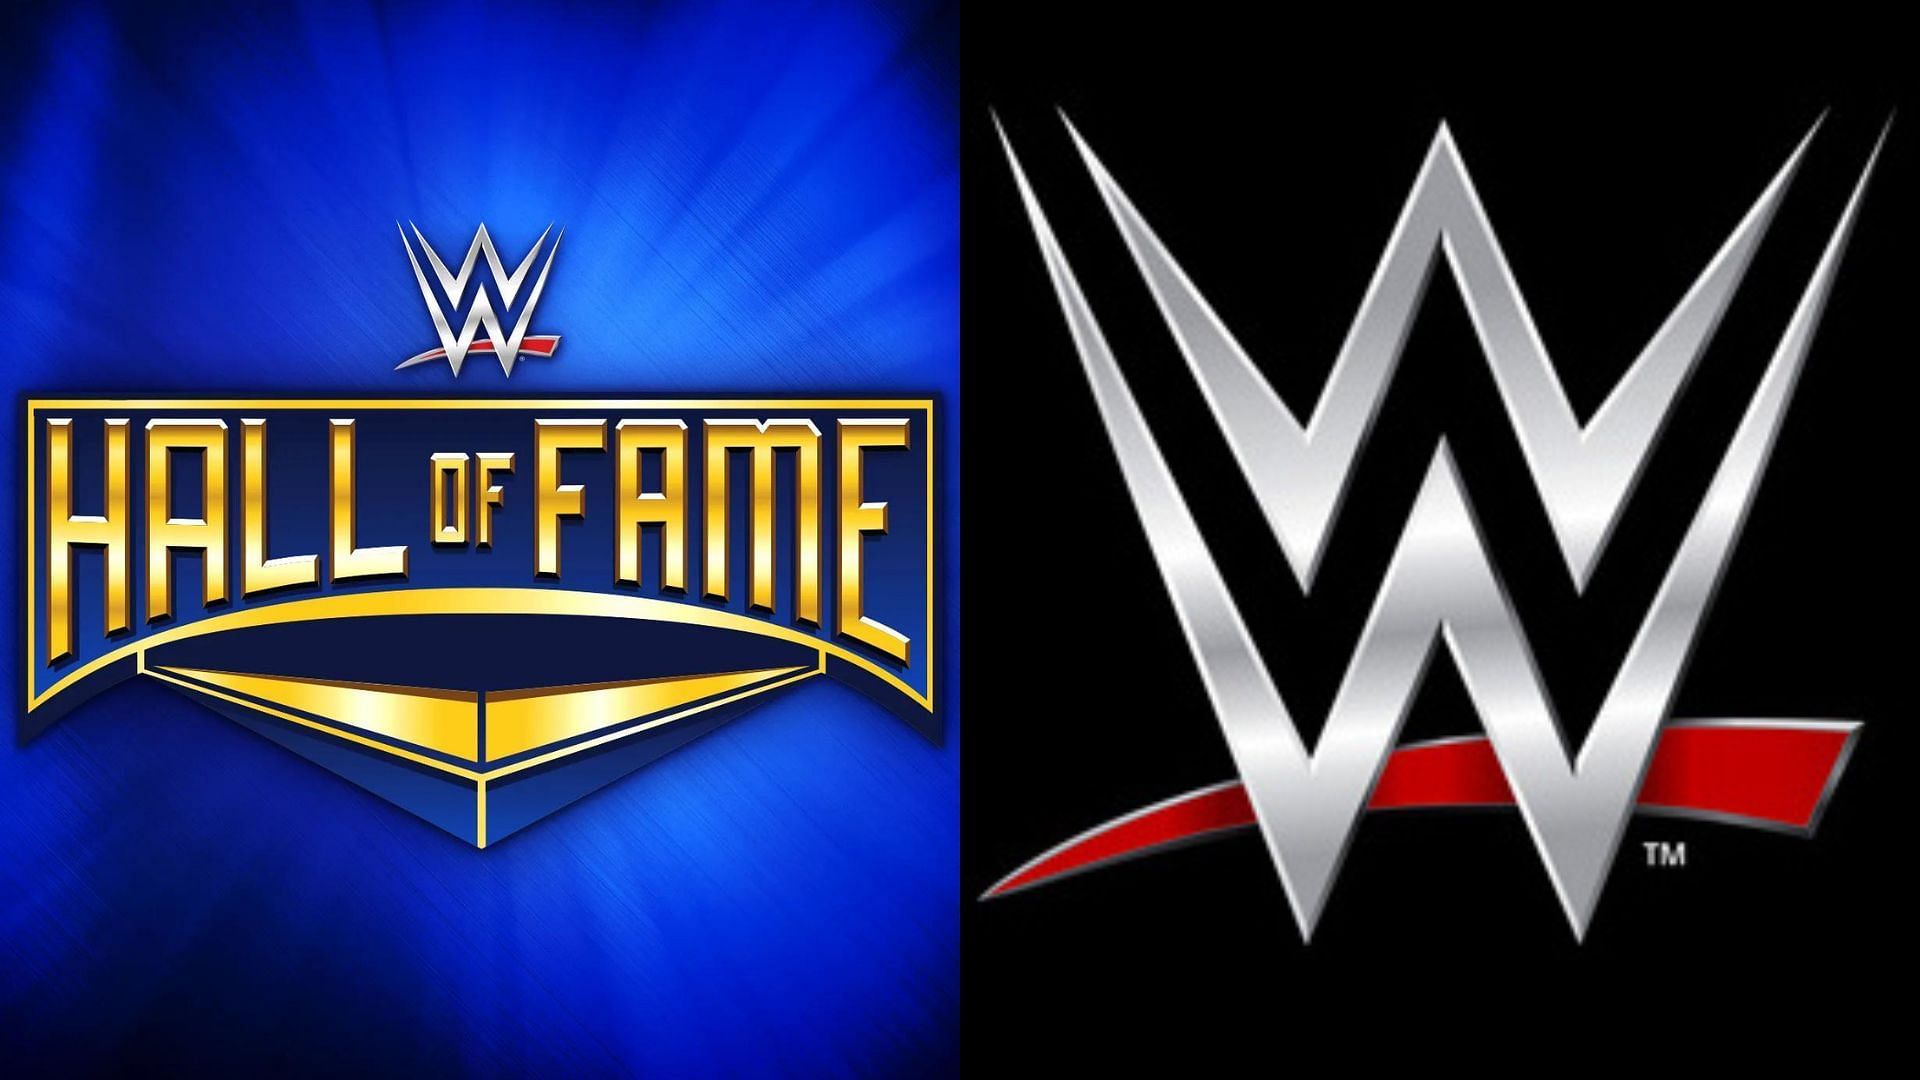 The 2023 Hall of Fame aired during WrestleMania 39 weekend. 